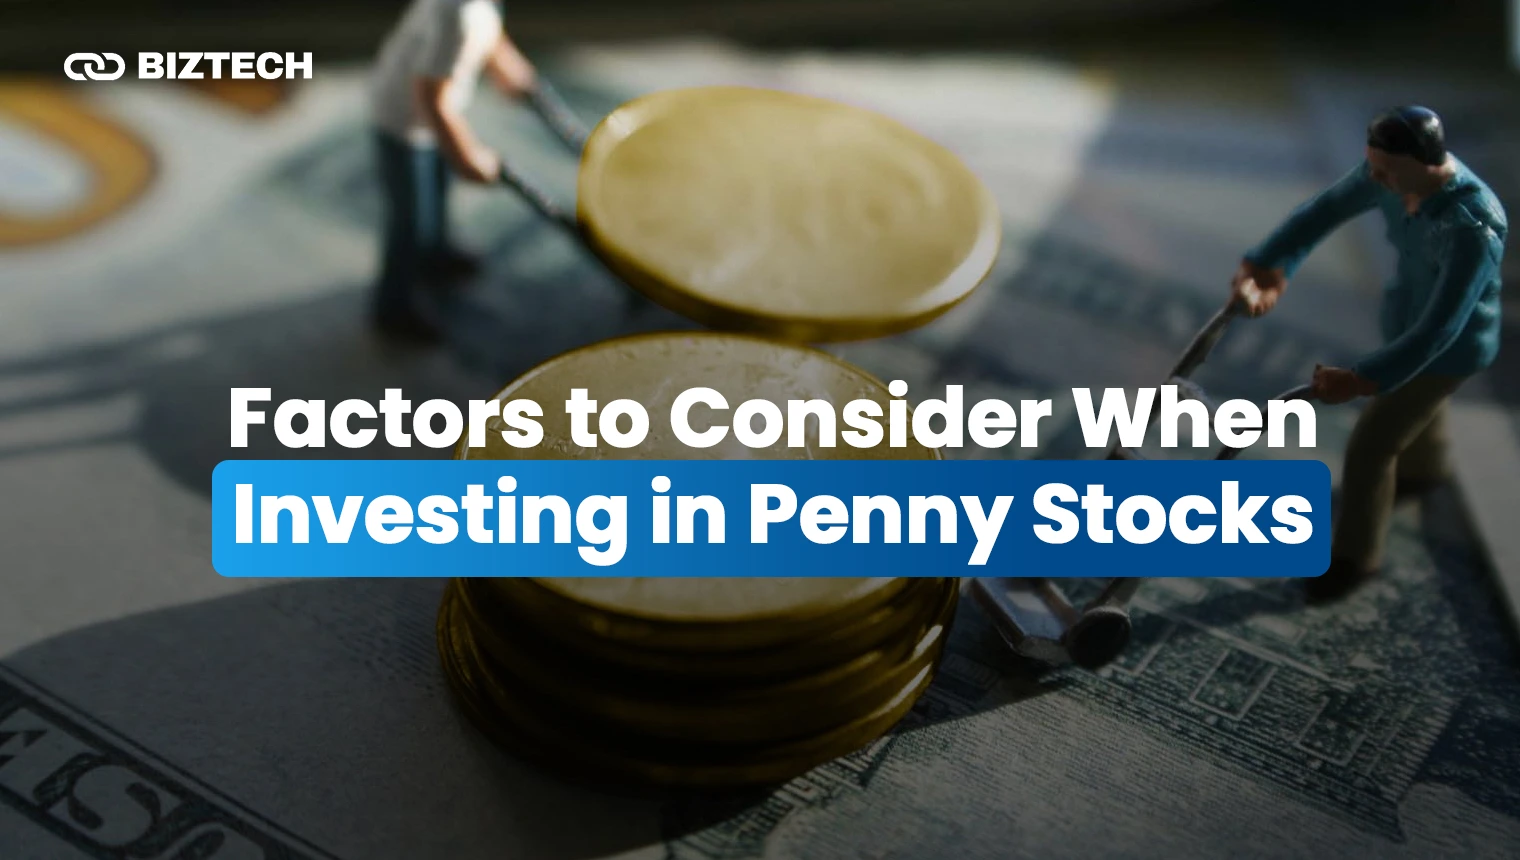 Factors to Consider When Investing in Penny Stocks